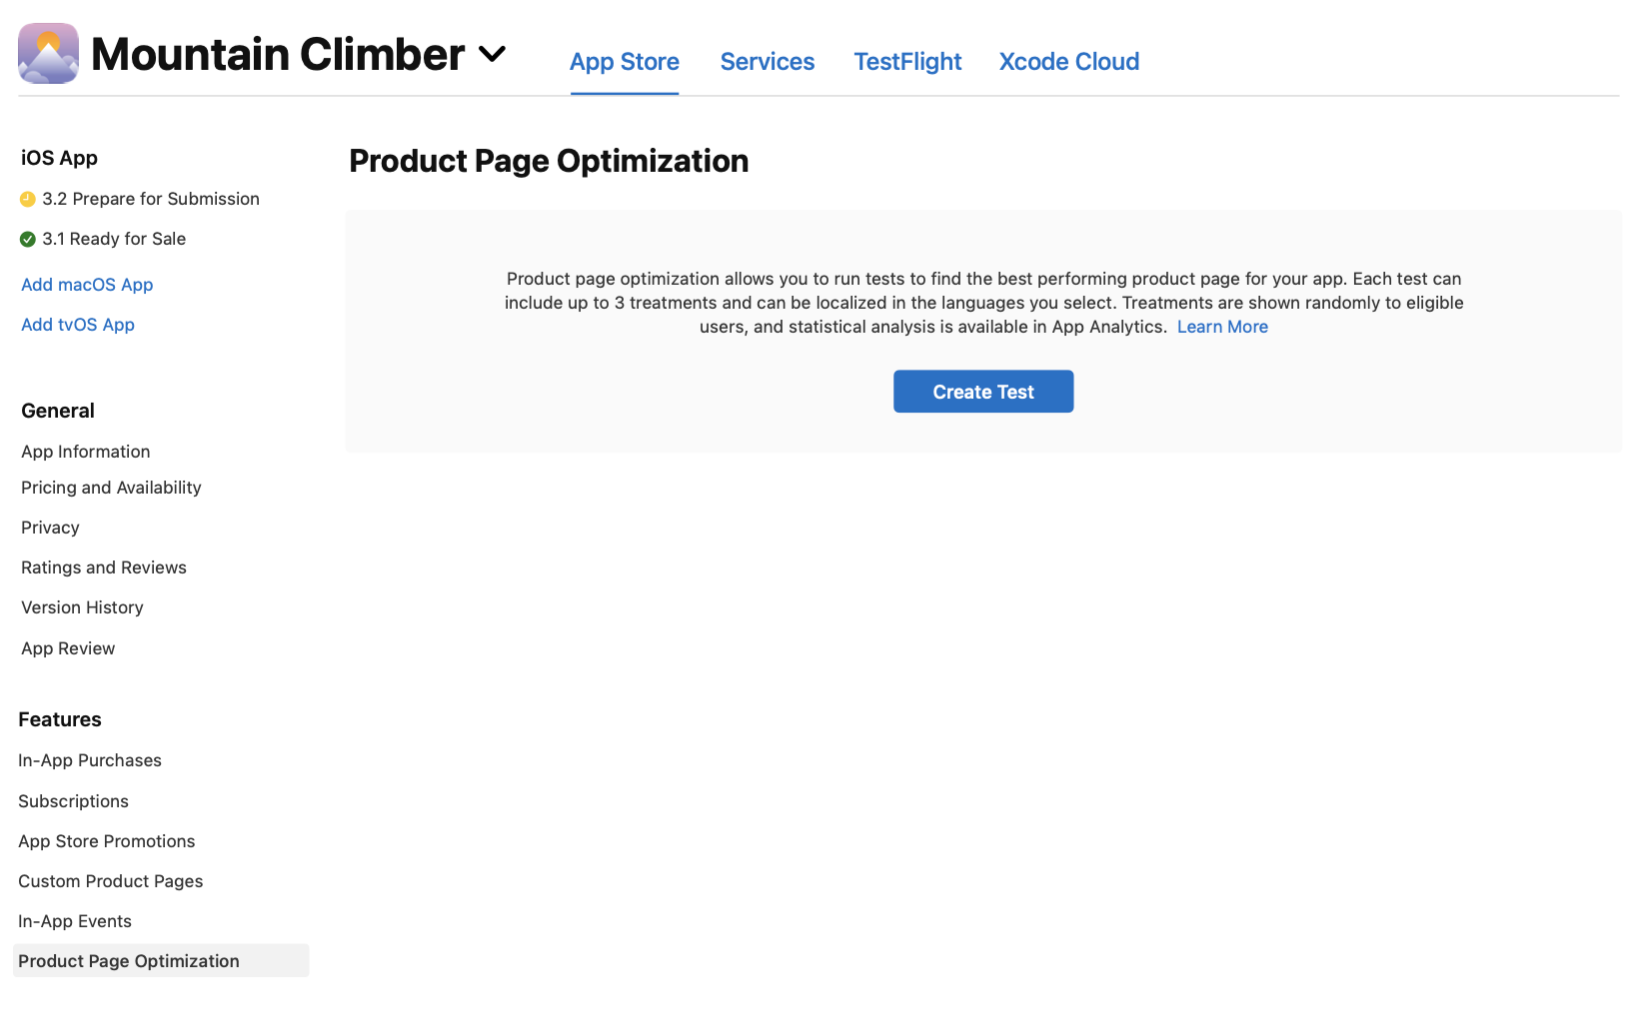 Create a product page optimization test.